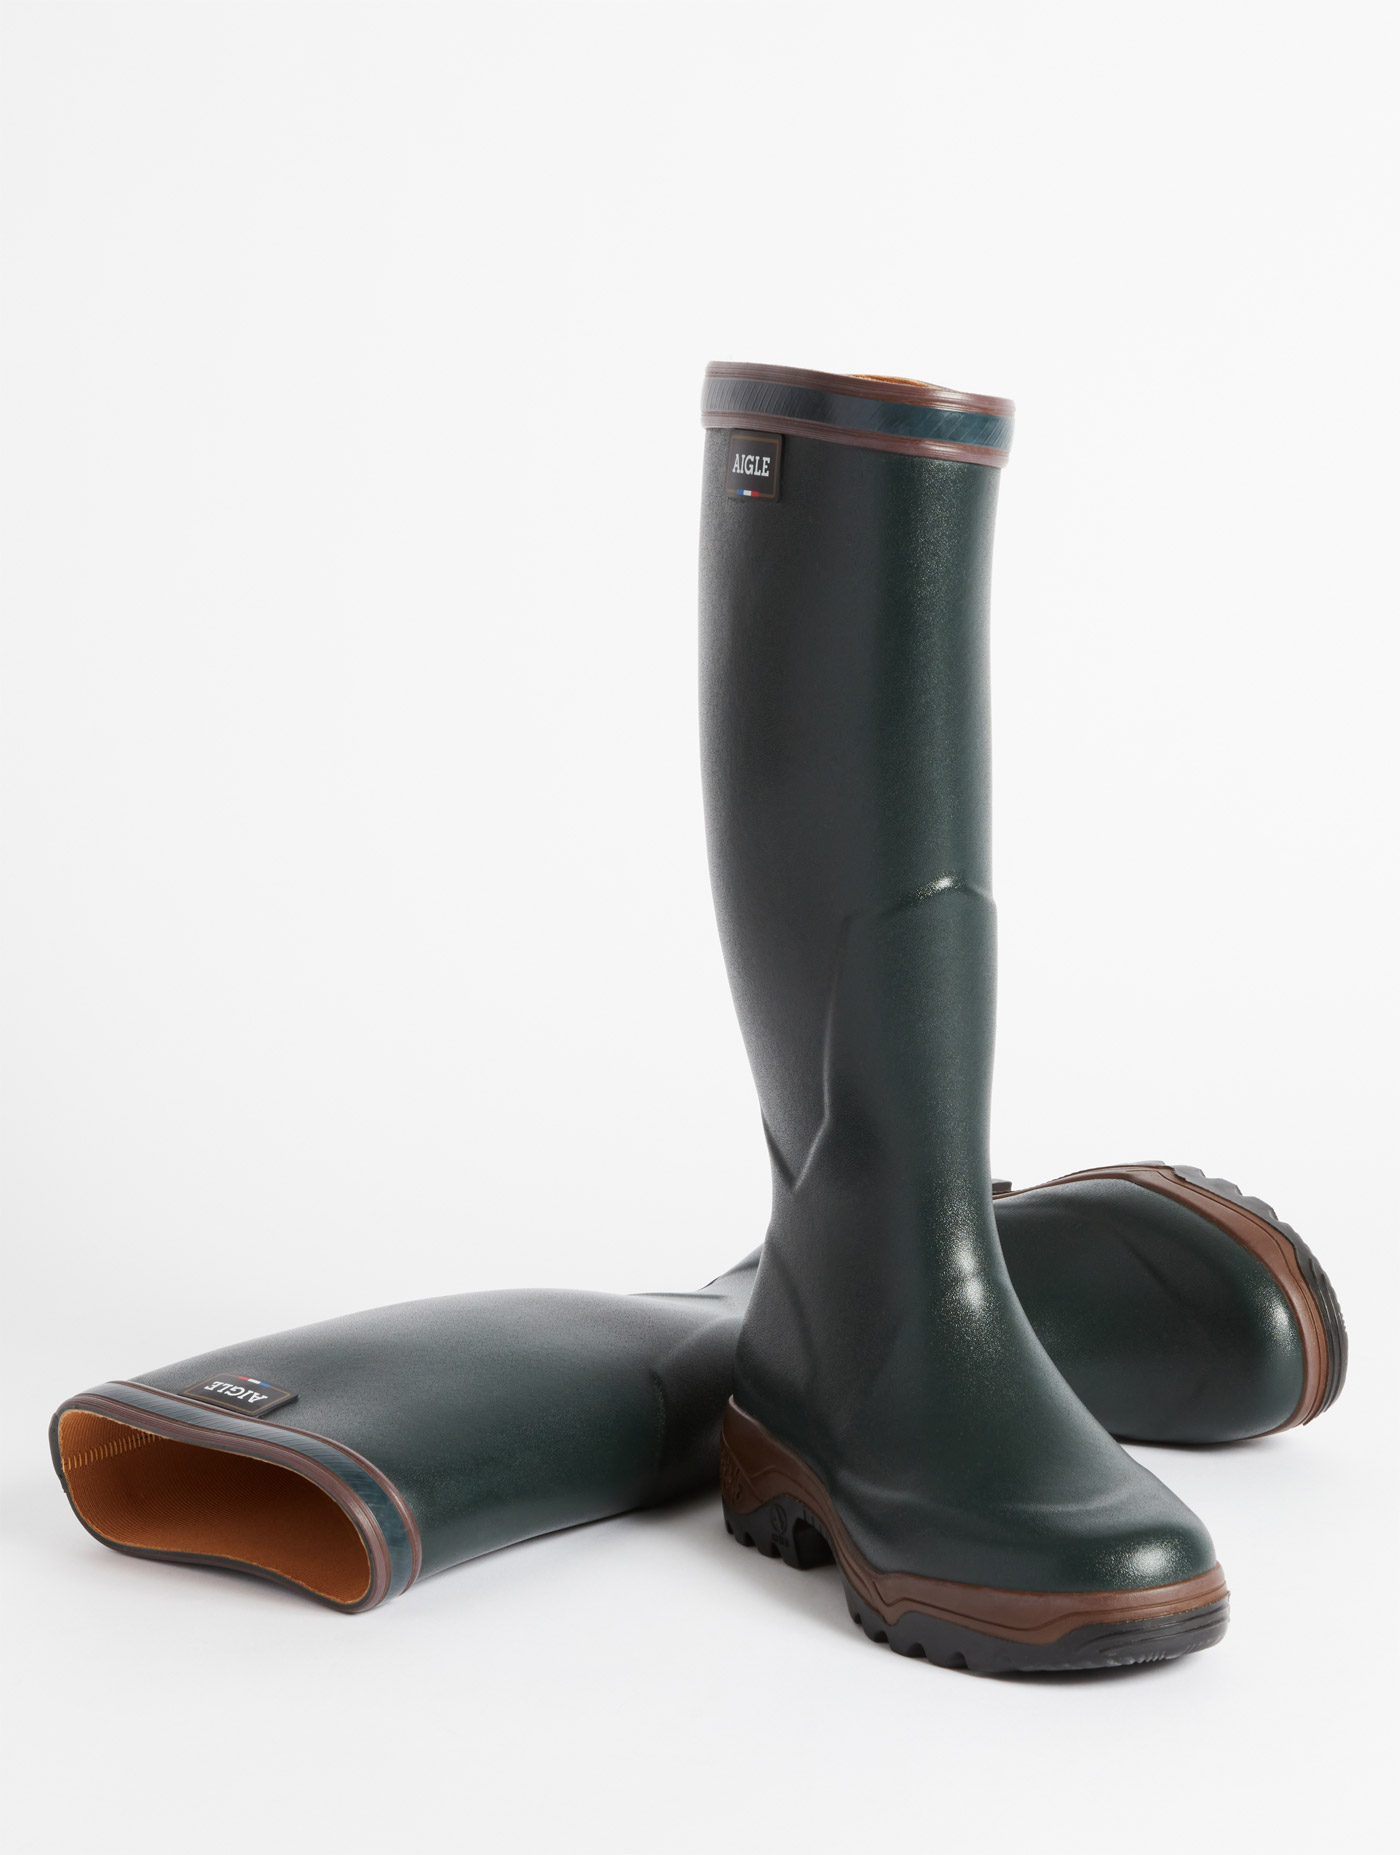 Bottes anti-fatigue Made in France